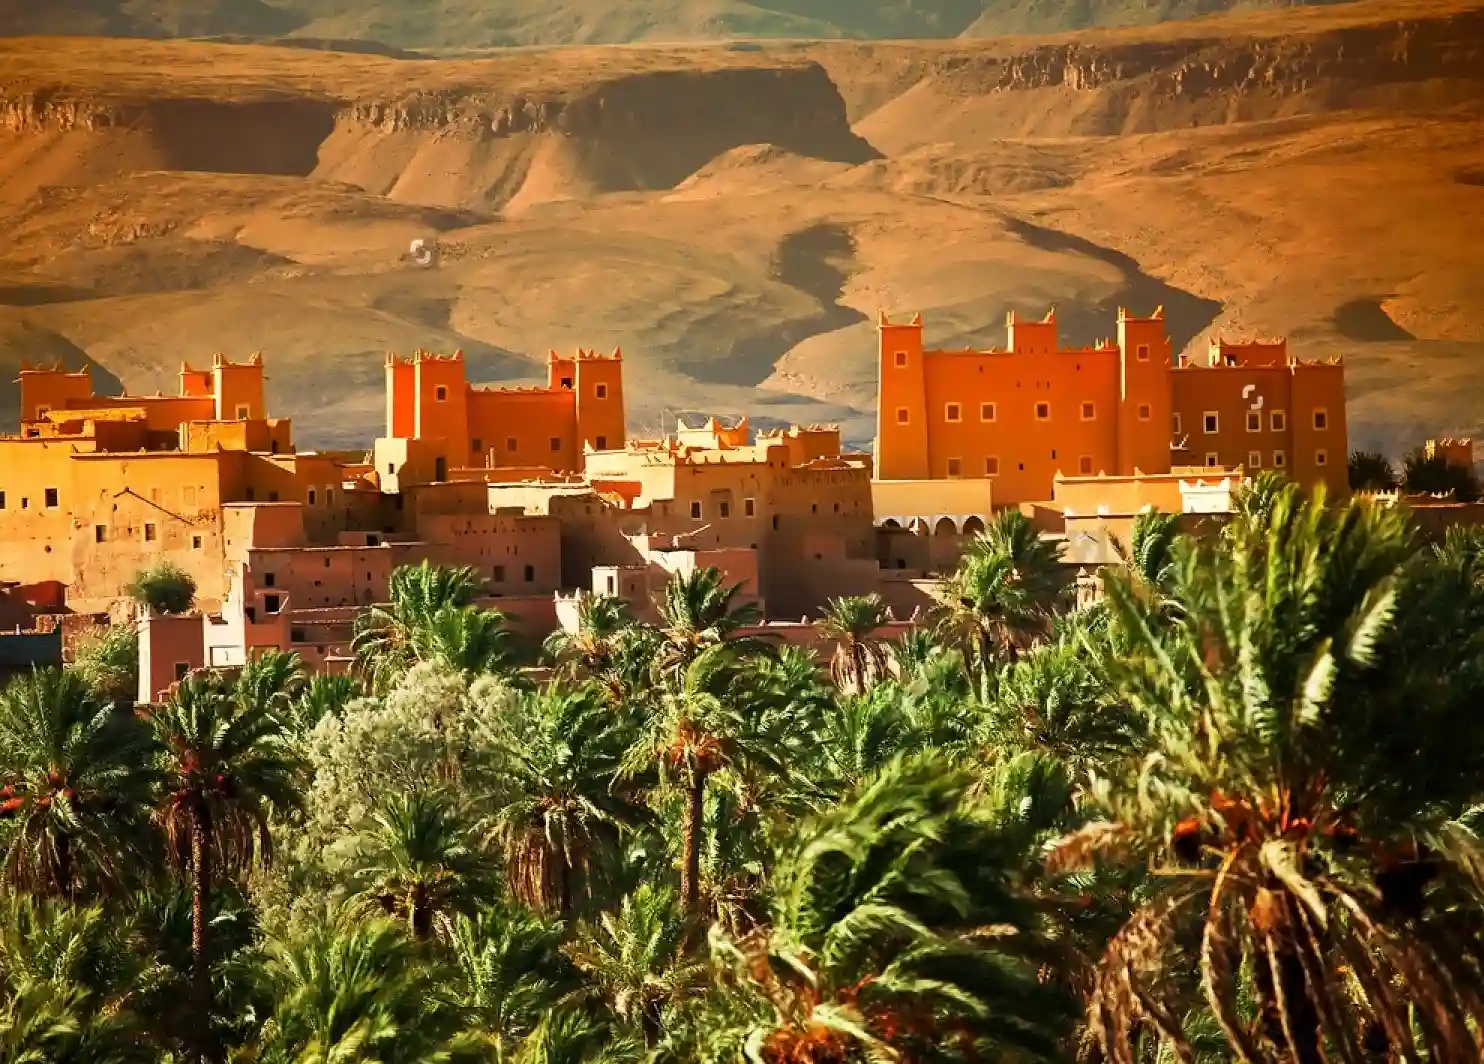 Is-Morocco-Good-for-Family-Holiday-Destination-to-explore-natural-landscape.webp